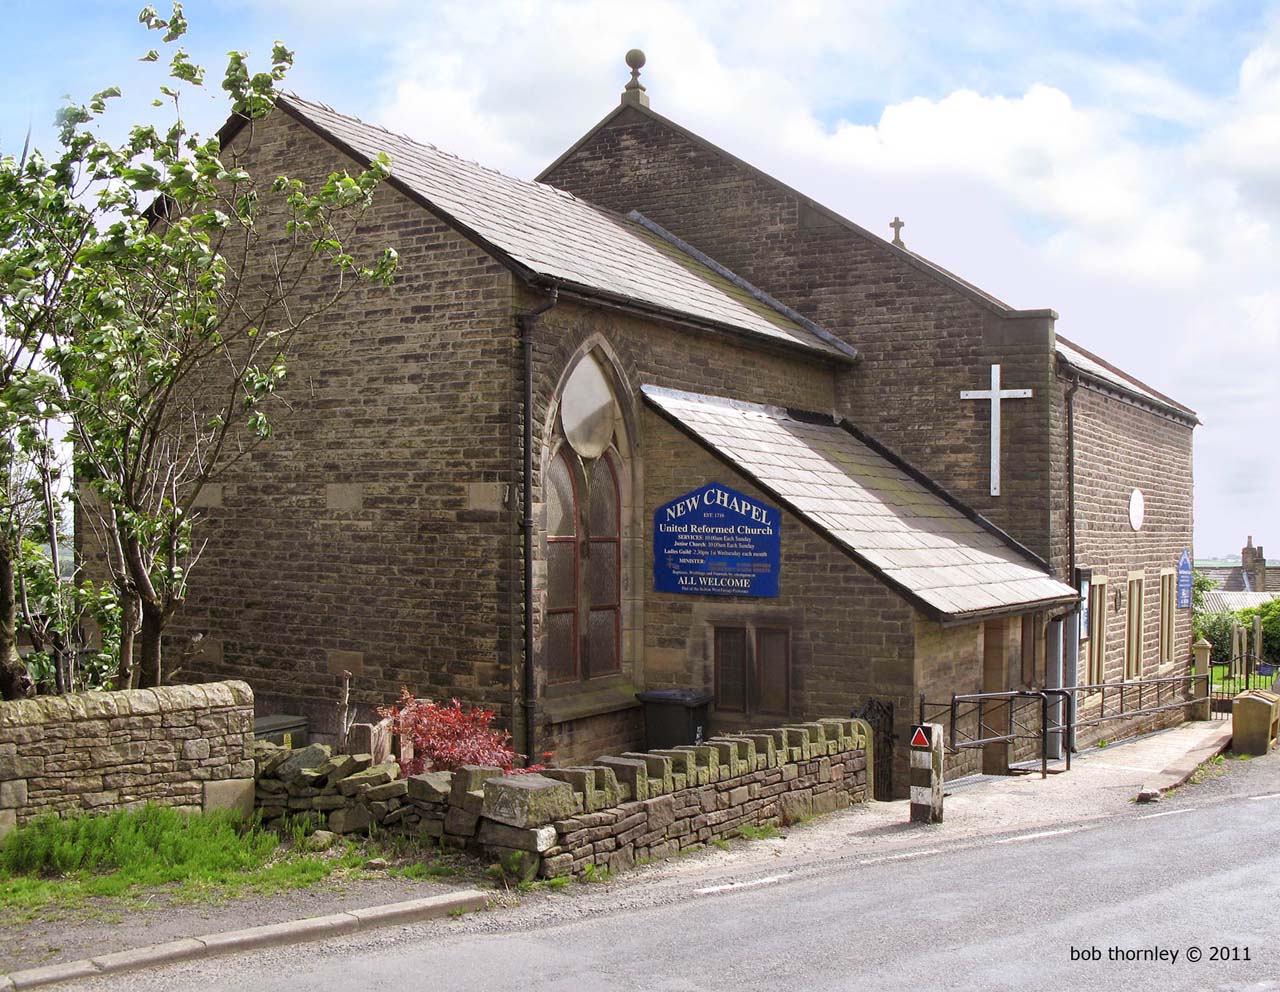 New Chapel Independent, Horwich